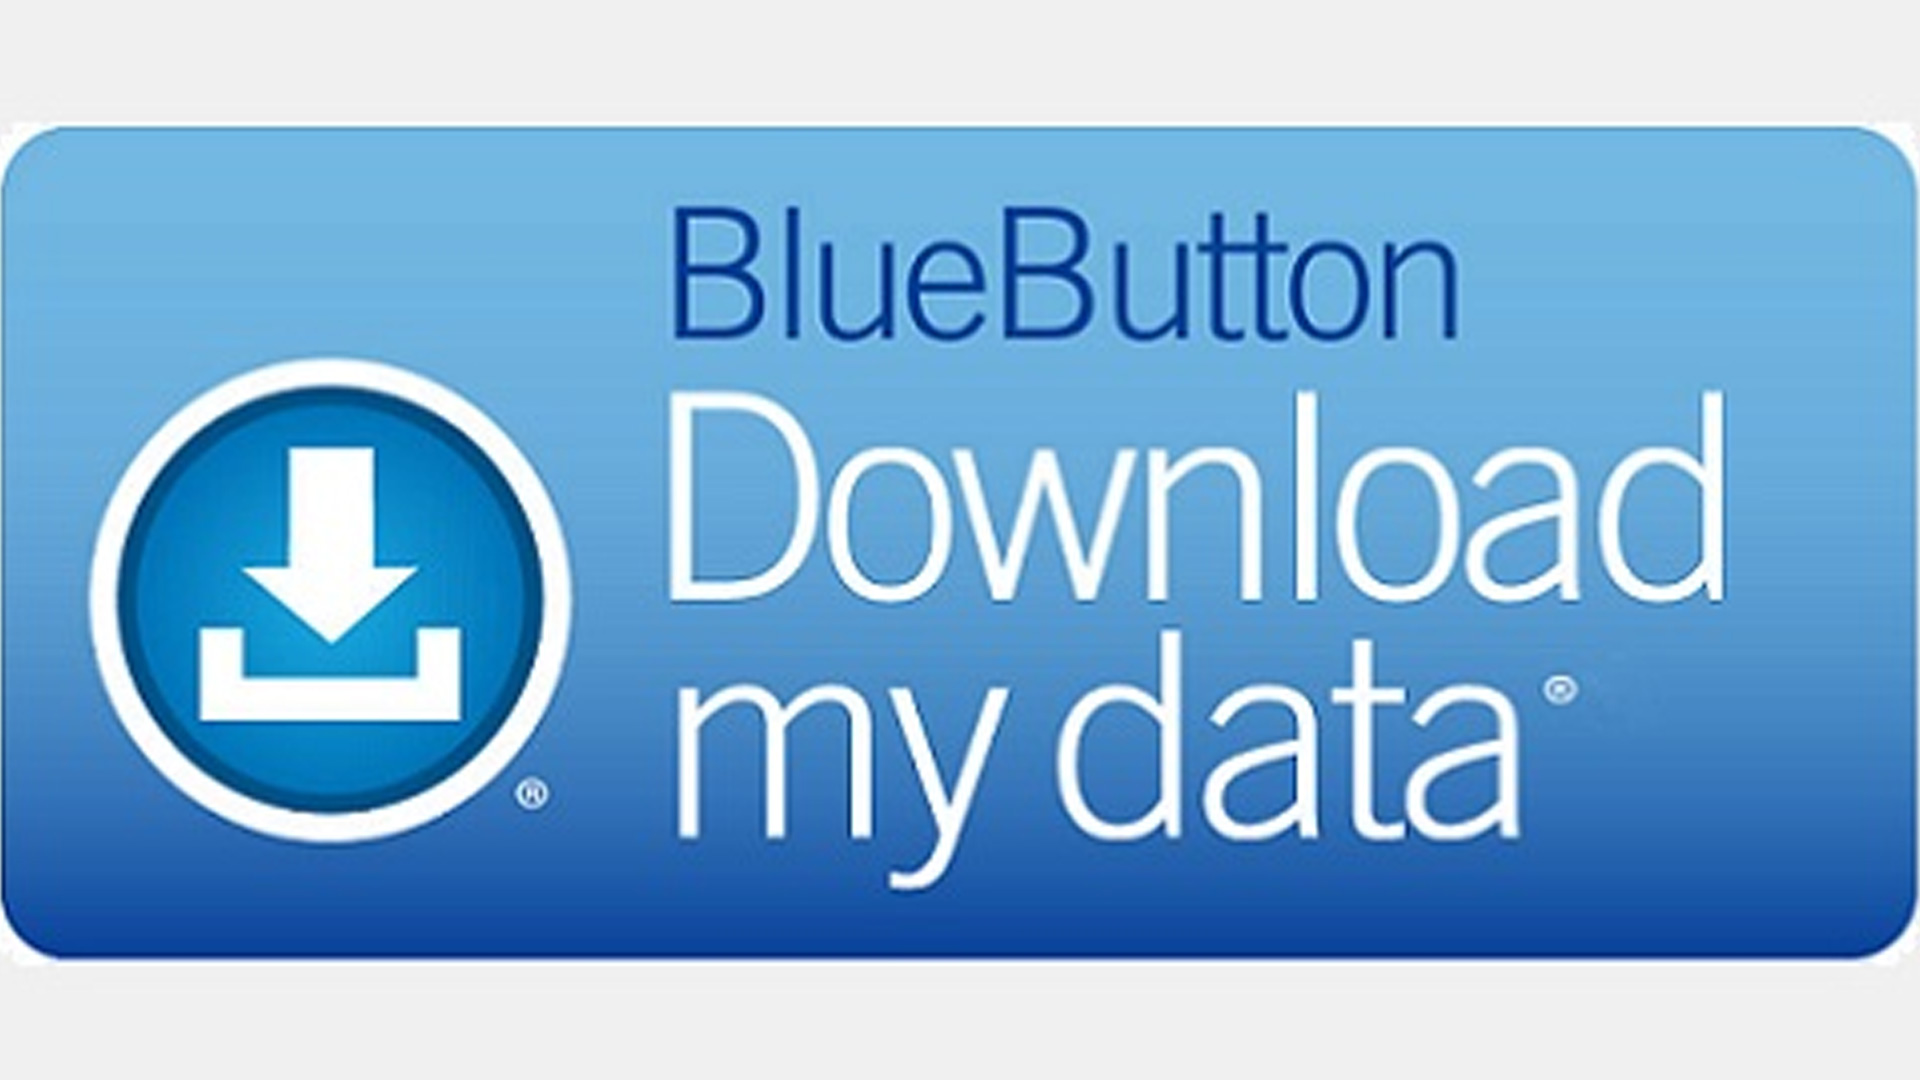 VA Blue Button: Empowering Veterans with Easy Access to Health Records...